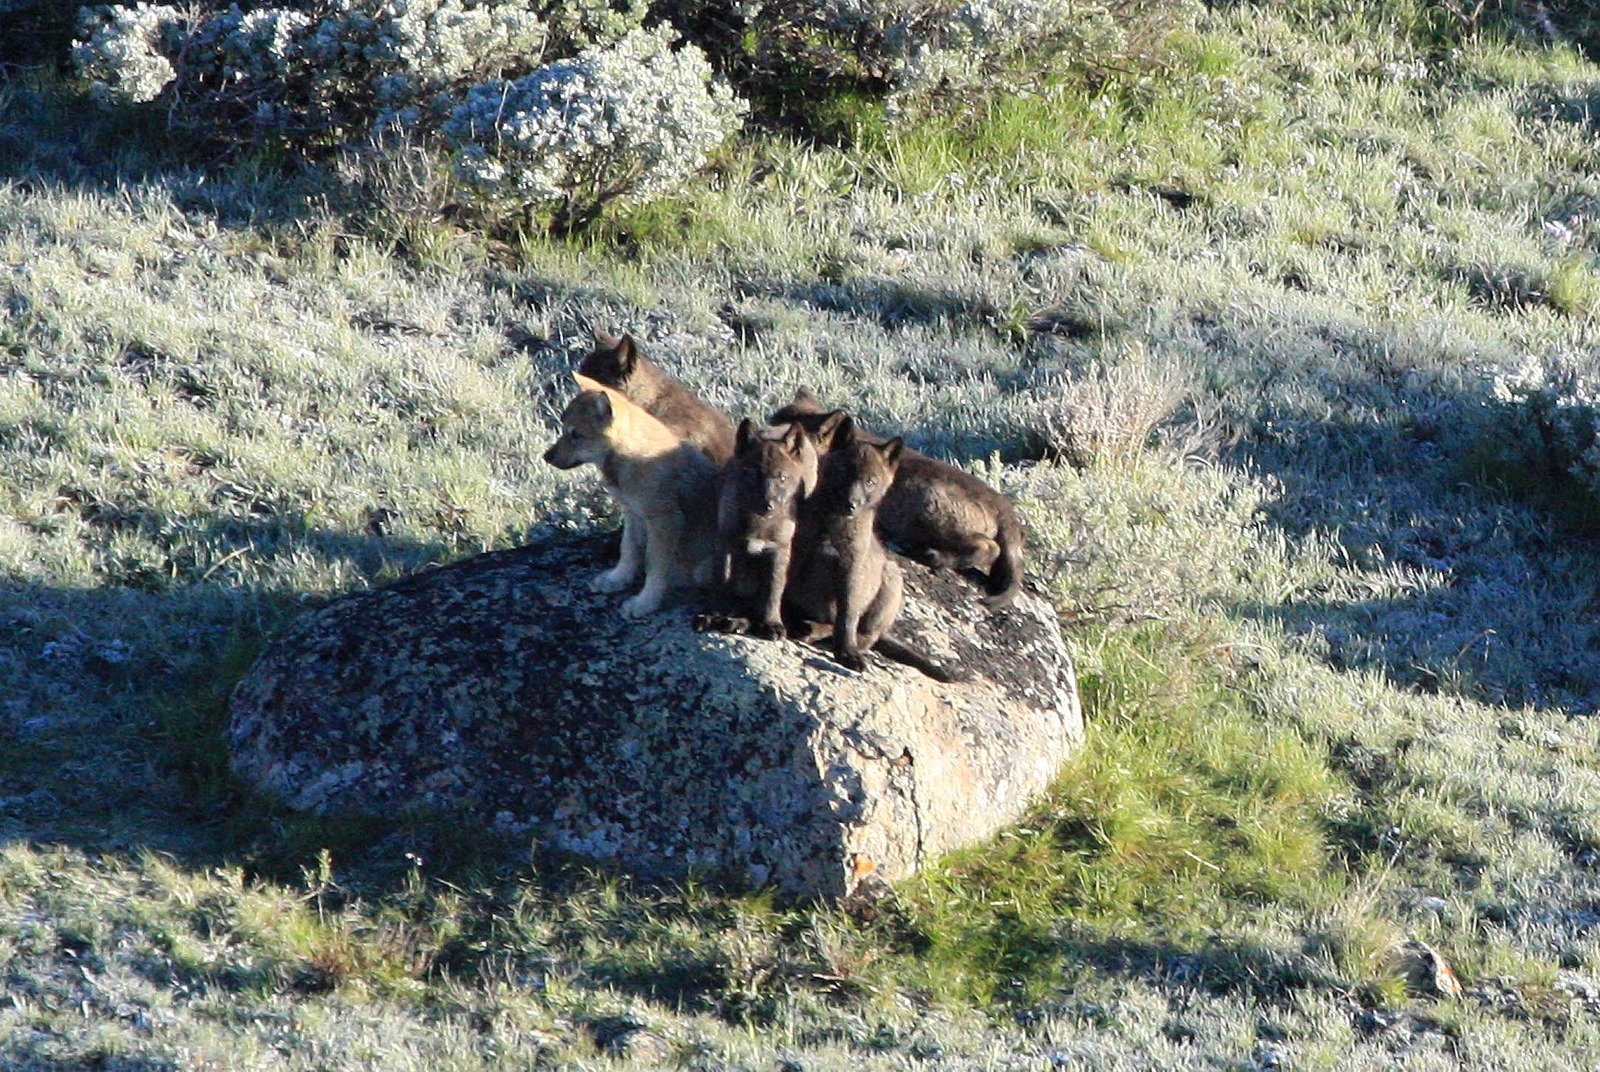 Wolf pups in Yellowstone. Are they "trophies?" Already in 2021, as a result of a controversial measures approved by Gov. Greg Gianforte, two wolf pups from a popular wolf pack in Yellowstone have been killed by hunters in Montana when the young wolves, who spend most of their lives in the park, wandered with their family across the invisible park border.  Gianforte claims wolves need to be controlled.  Yet in 10 years there have been only three cases of wolves killing livestock along the Yellowstone border. Photo courtesy NPS